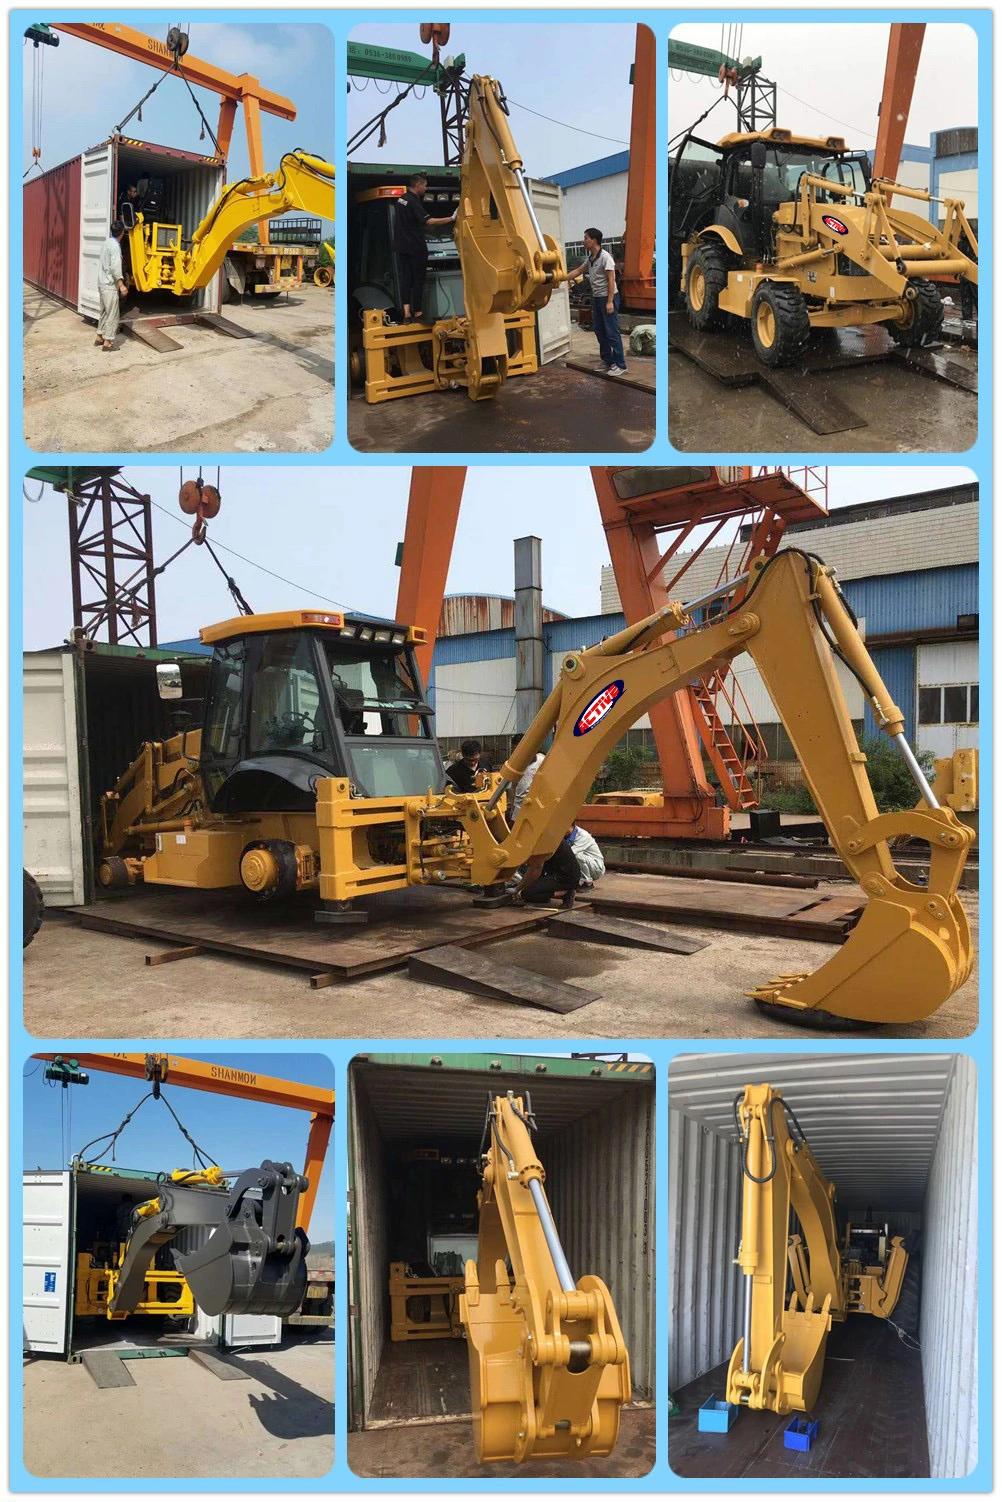 High Quality OEM Factory ACTIVE Brand AL388 8.2ton Backhoe with 74kw Cummins Engine for Sale